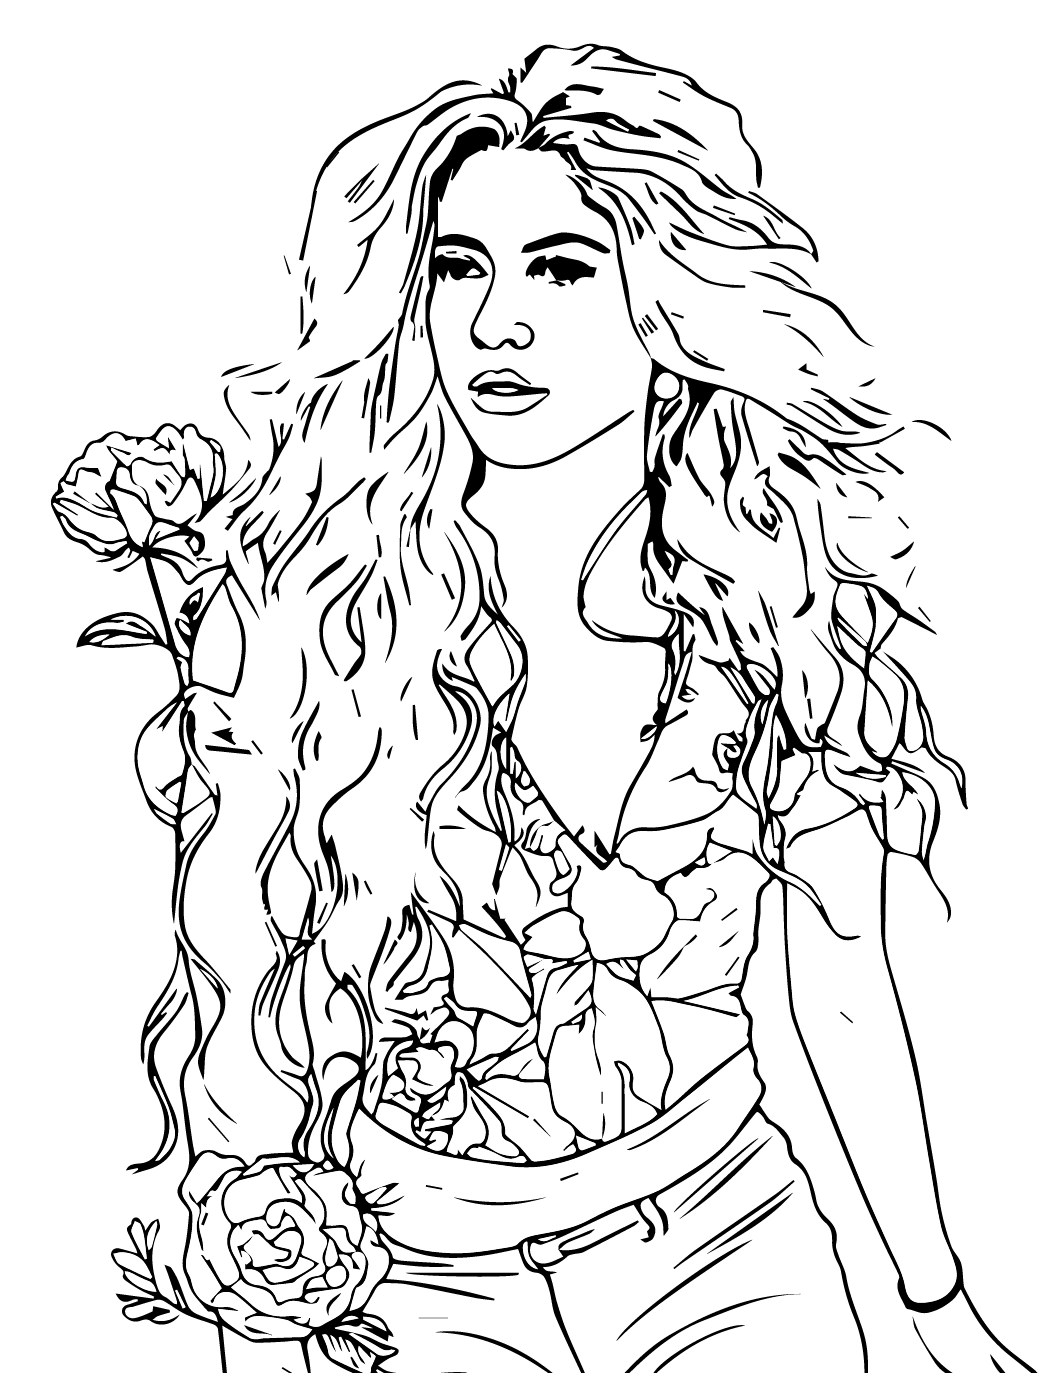 Shakira coloring pages printable for free download